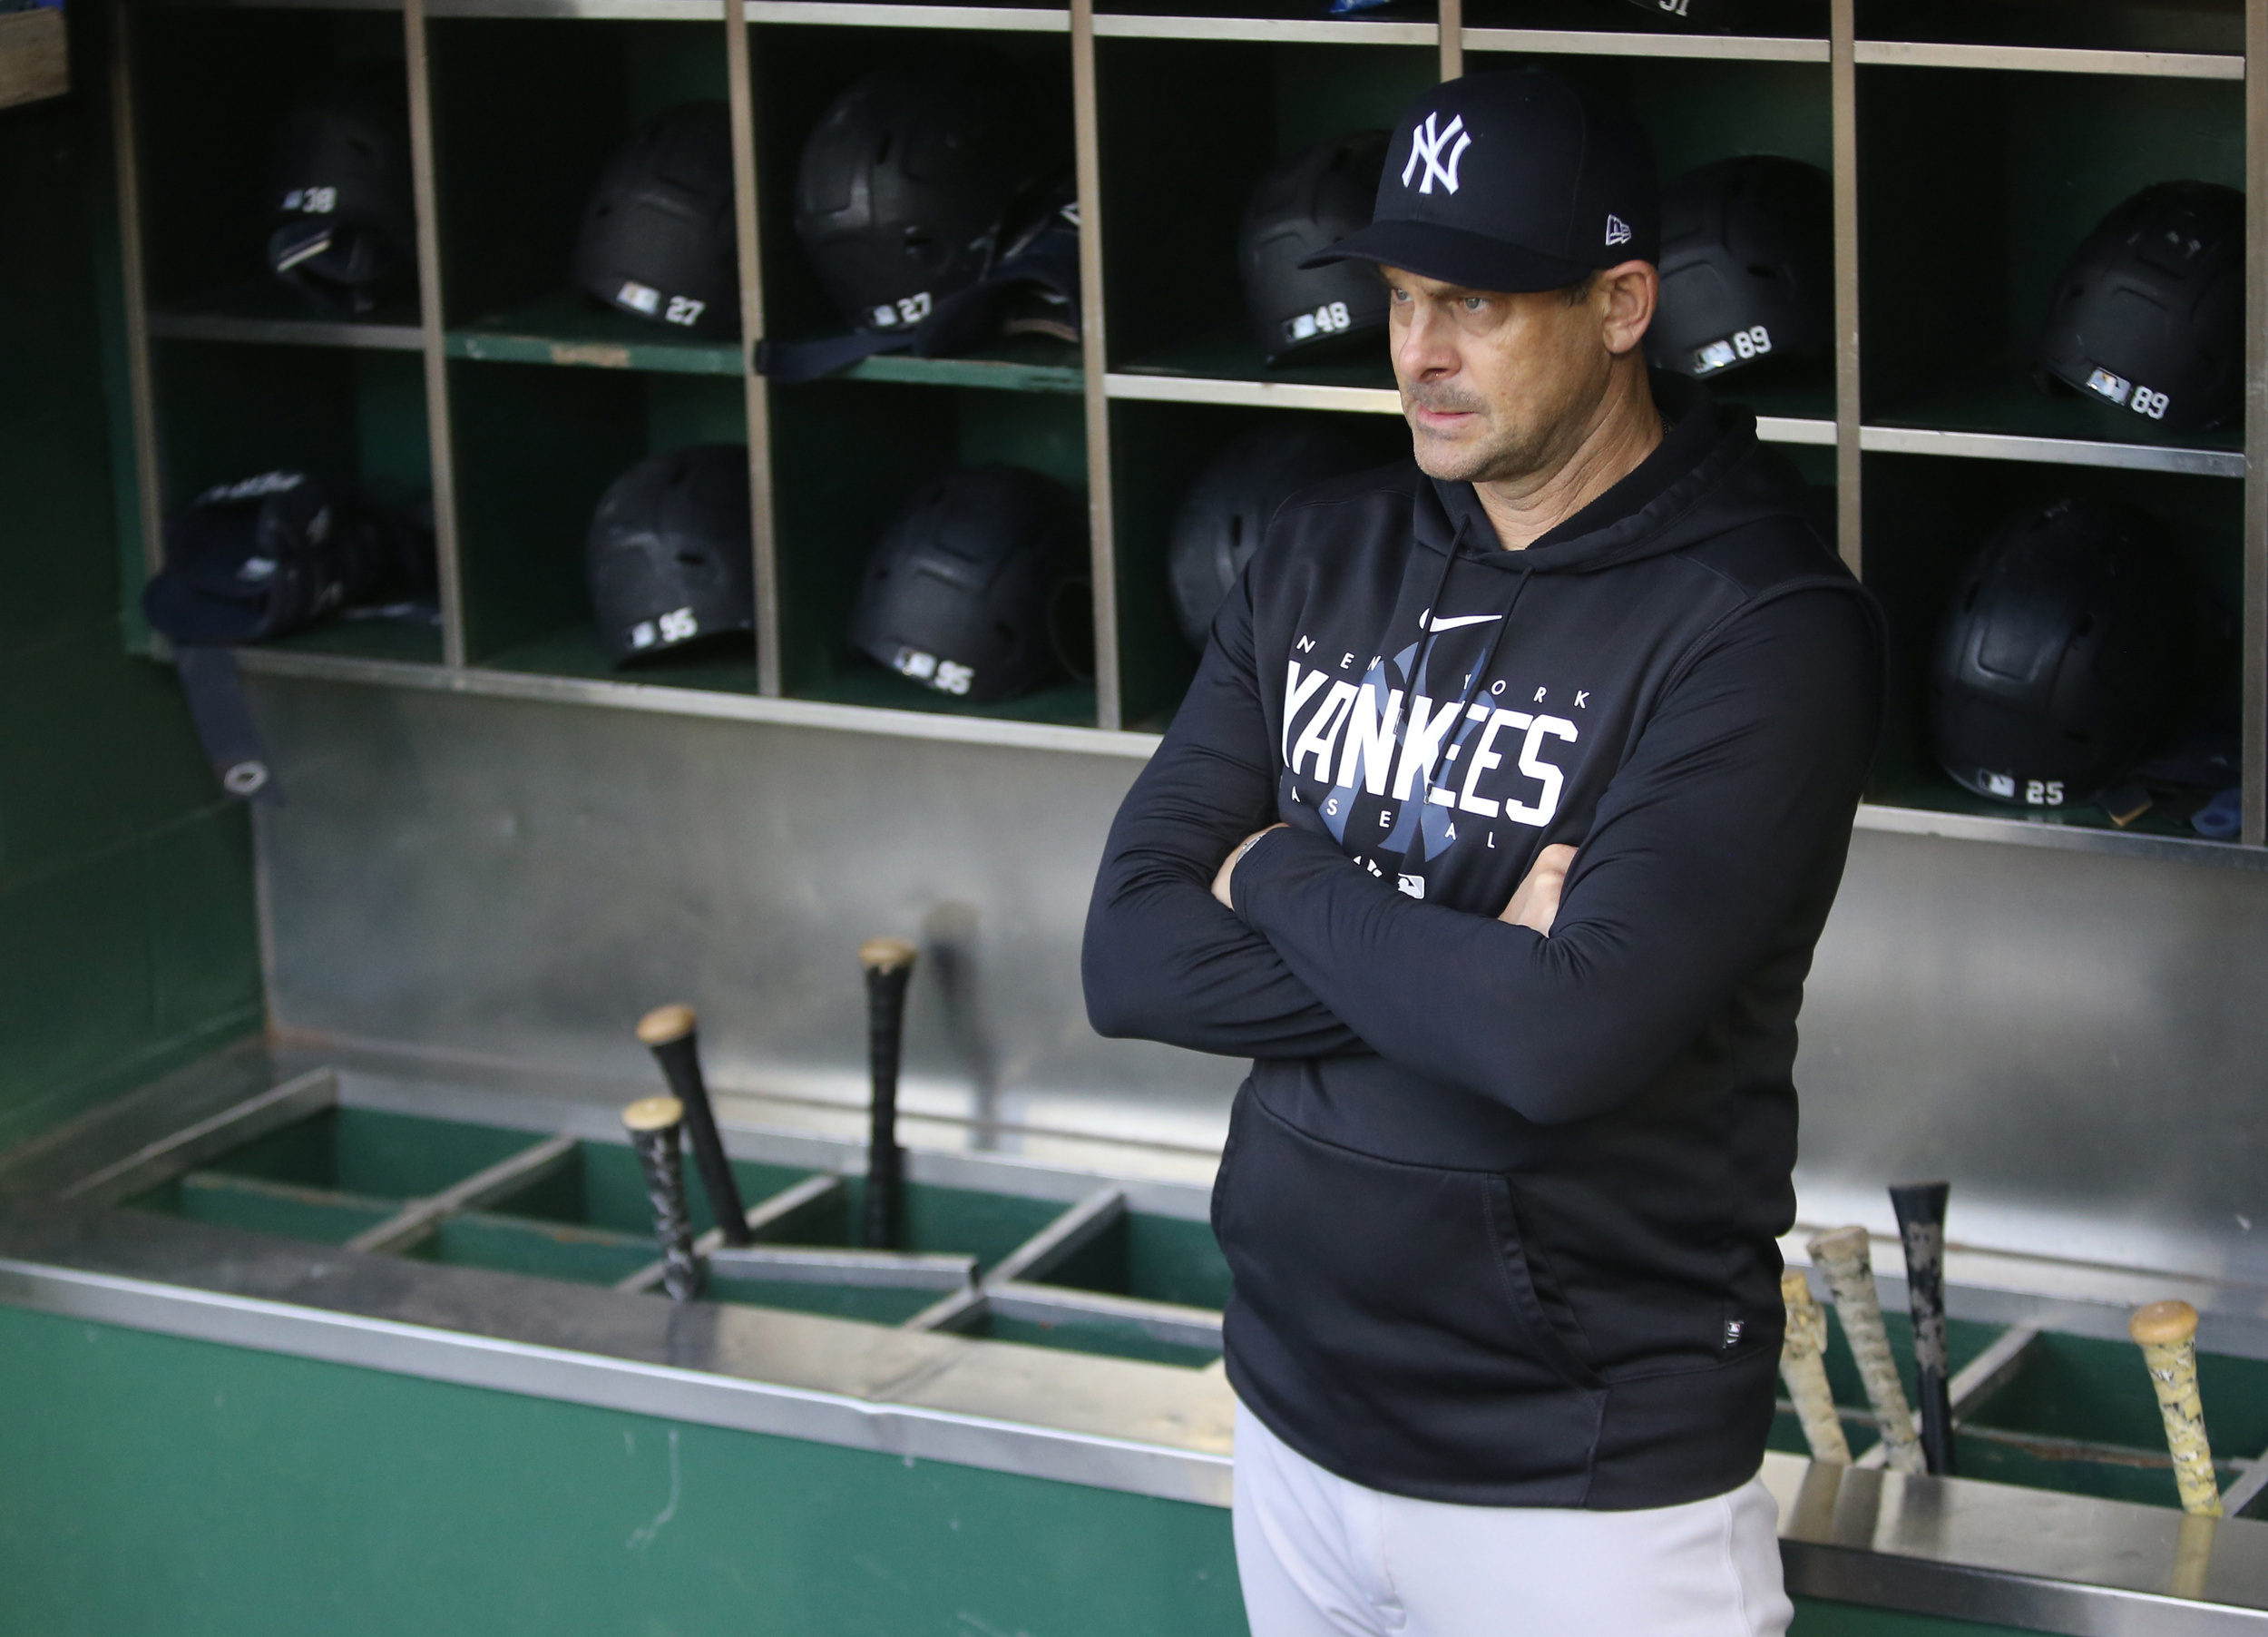 Aaron Boone is expected to be back as the Yankees manager, per Andy Martino